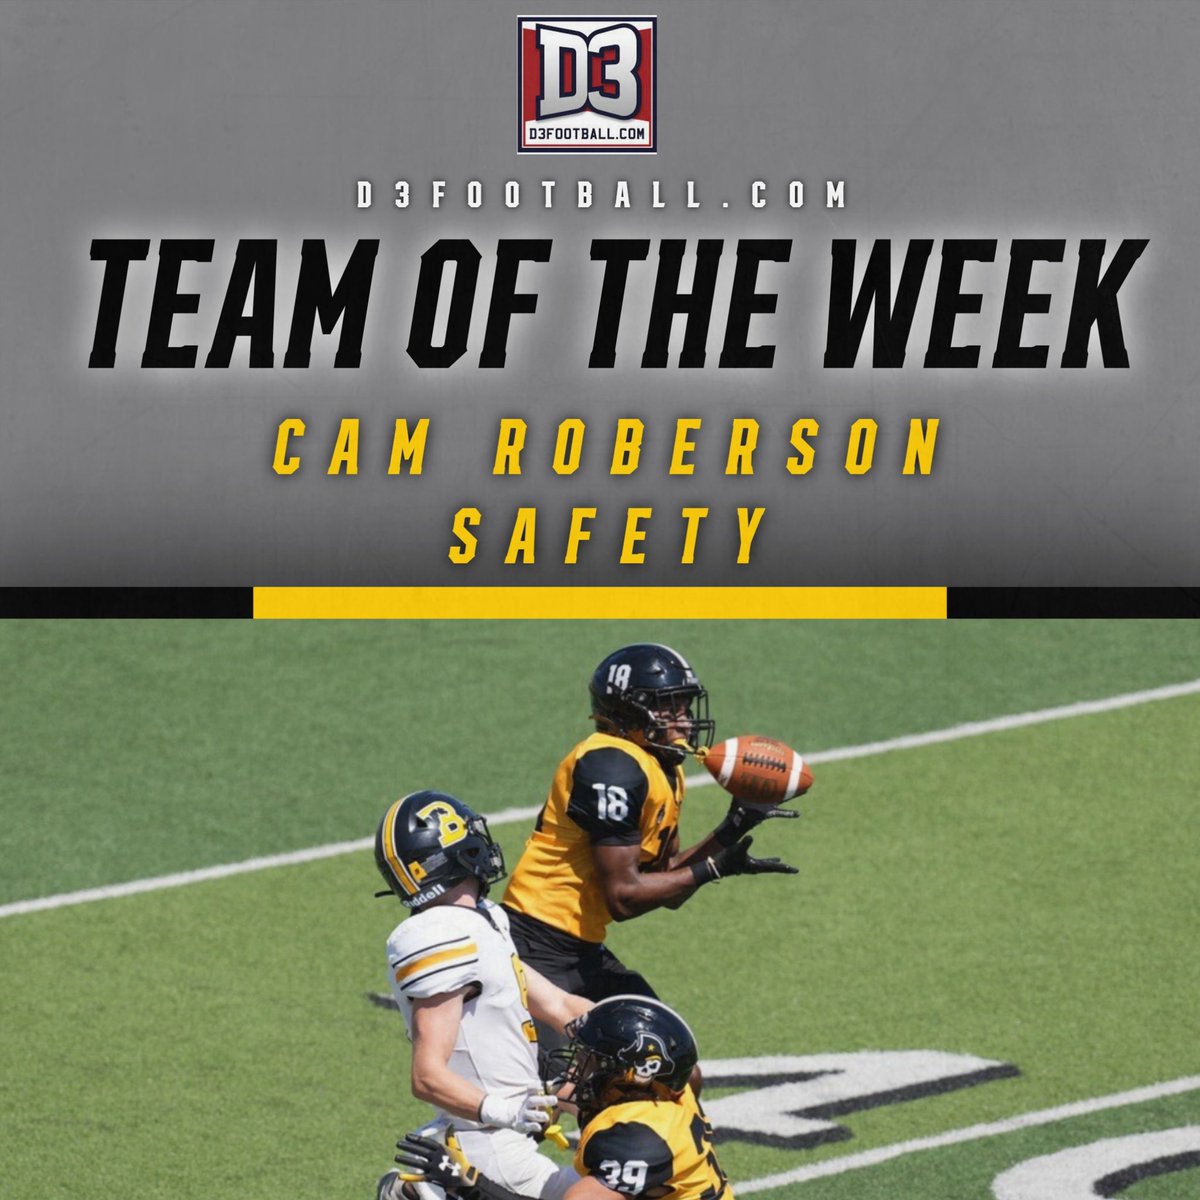 Make it two awards for the freshman, Cam Roberson was named to D3Football.com Defensive Team of the Week! 🏴‍☠️ 🏈 @SUPirates